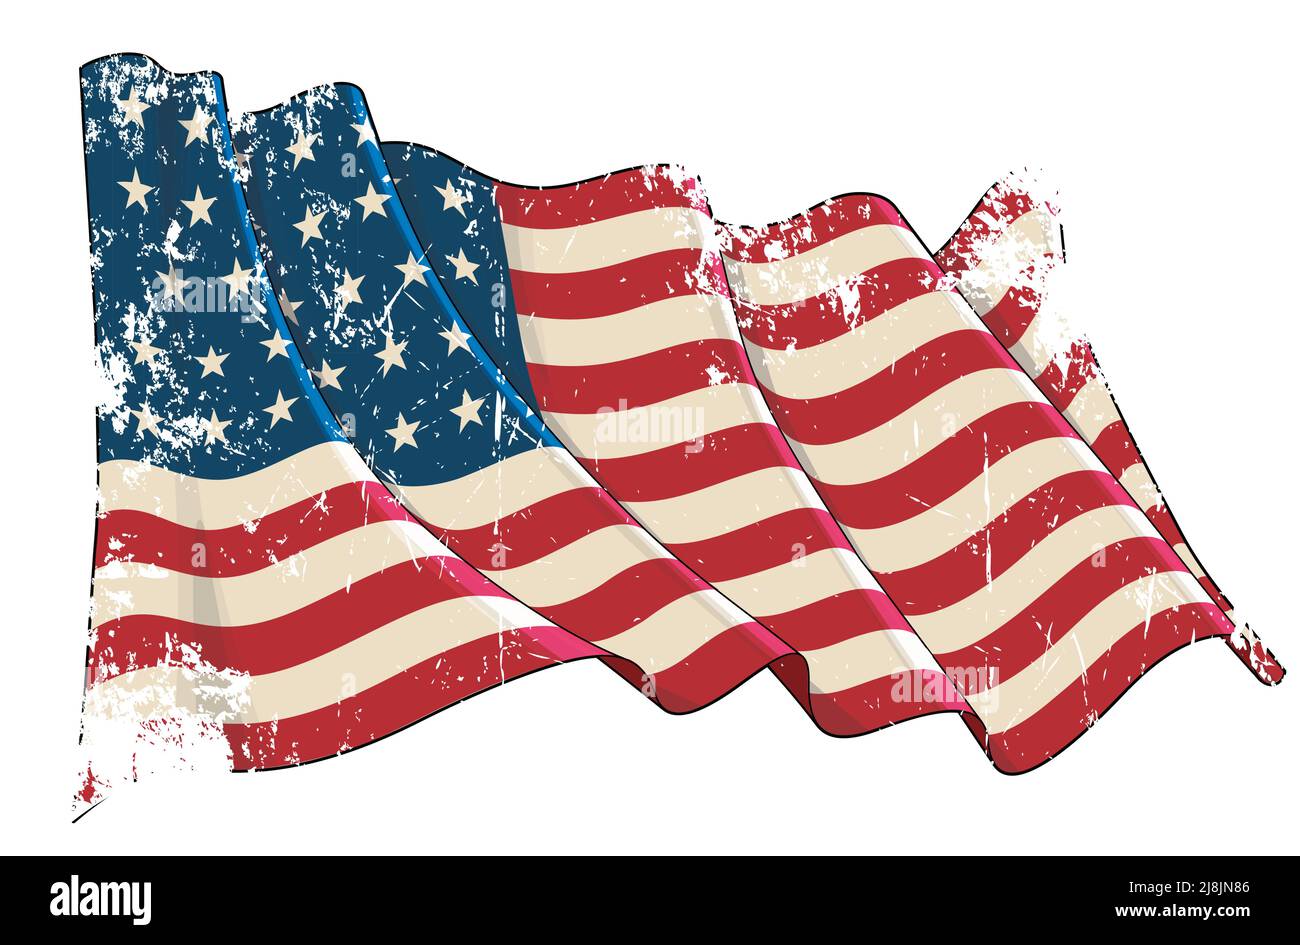 Vector Textured Grunge illustration of a Waving Flag of USA during the American Civil War. All elements neatly layers and groups. Sepia overtone on a Stock Vector